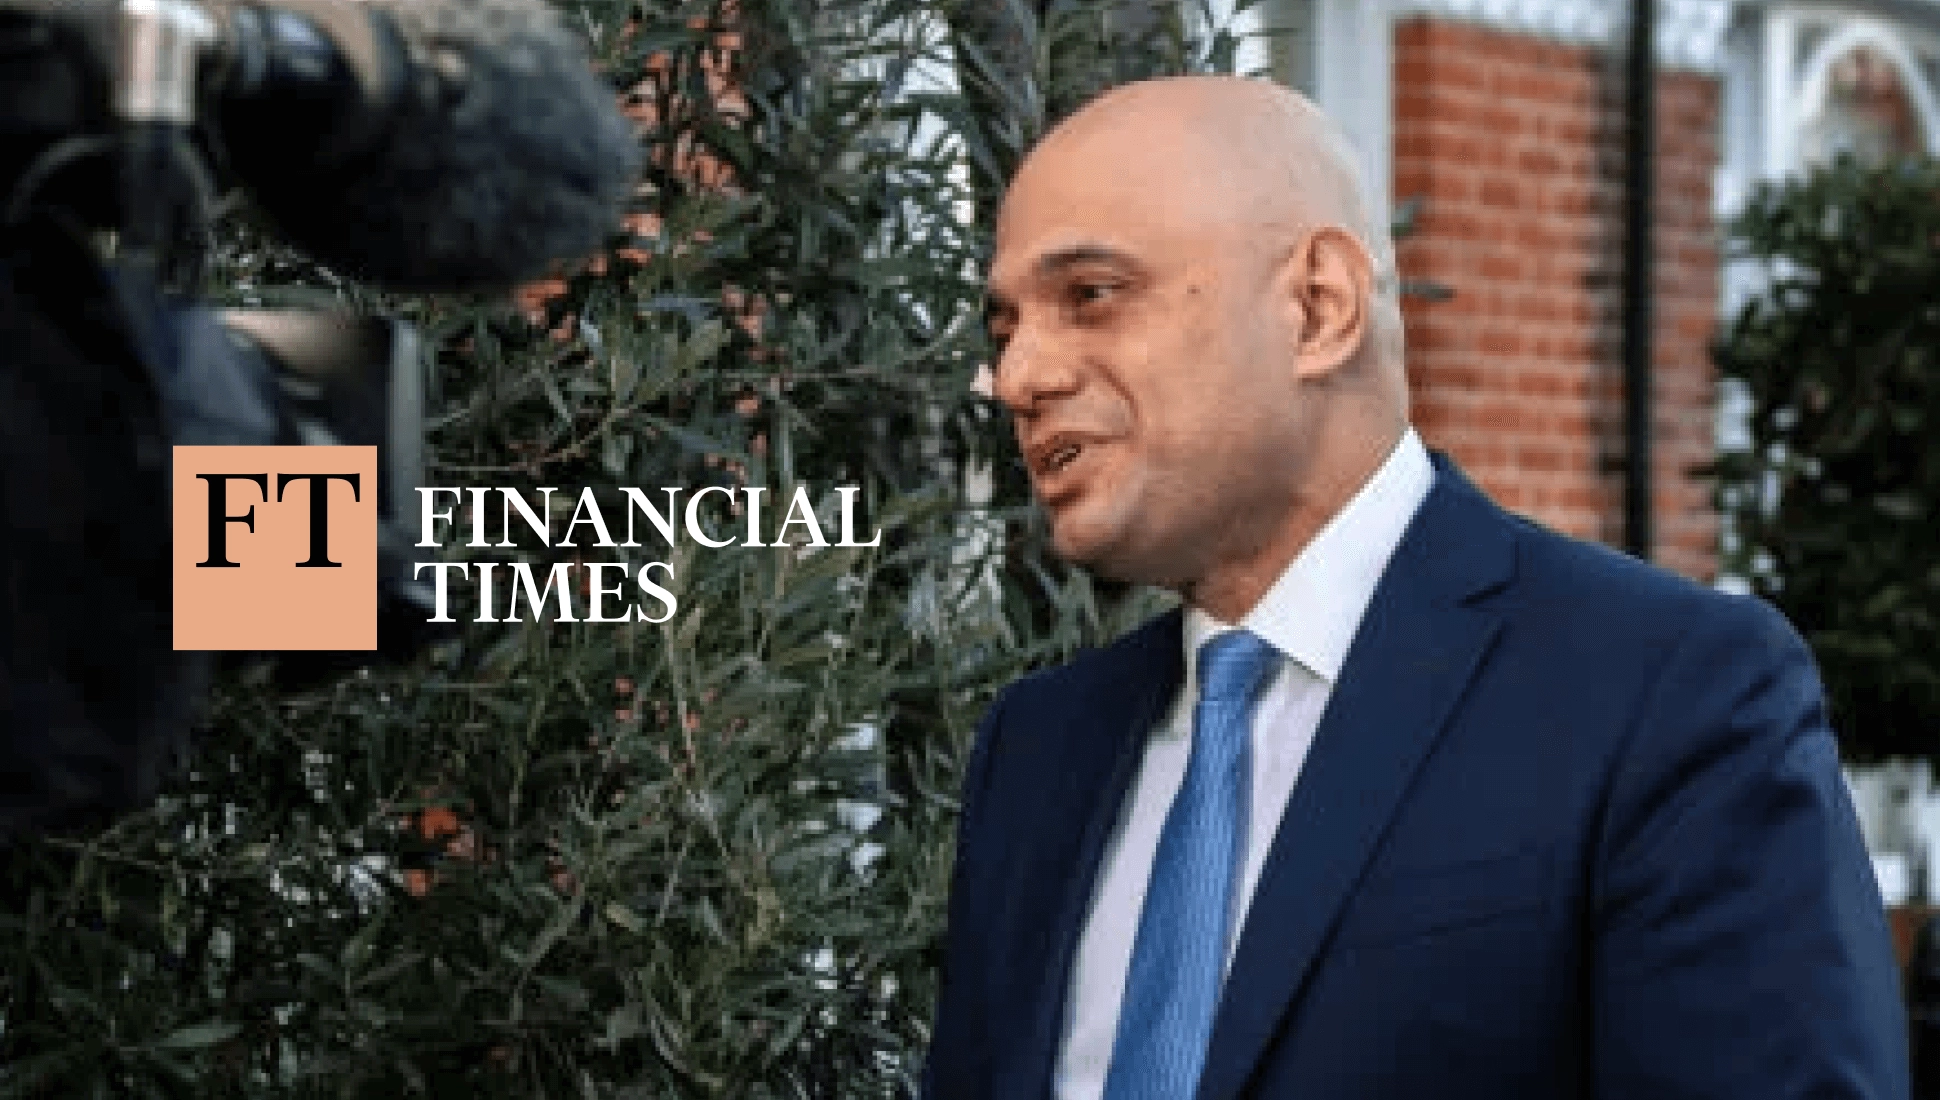 Financial Times: Islamic fintechs look to emerge from ‘under the radar’ in the UK